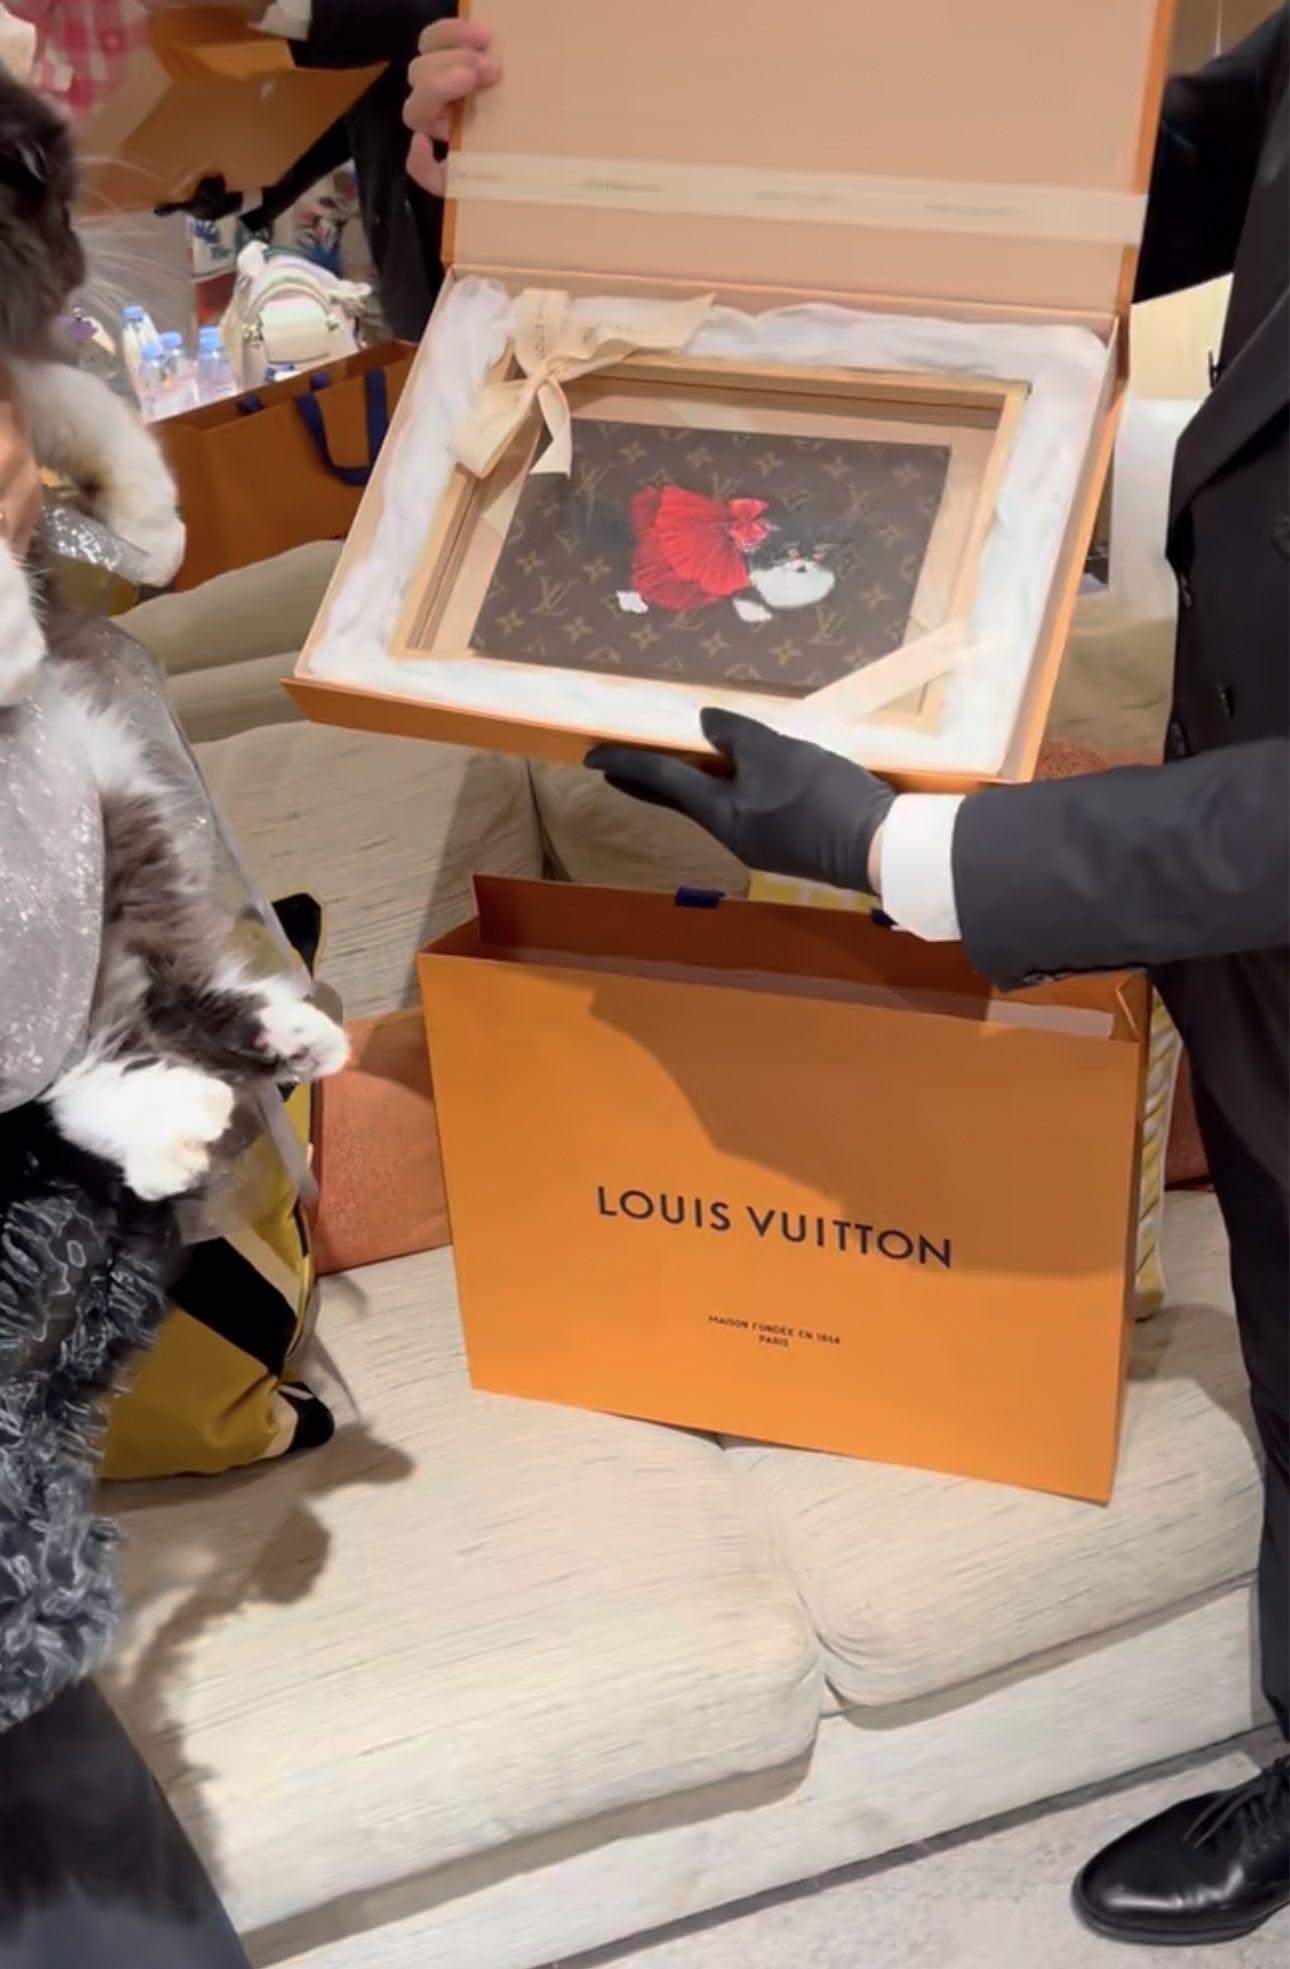 Cat gets self portrait as gift from lv